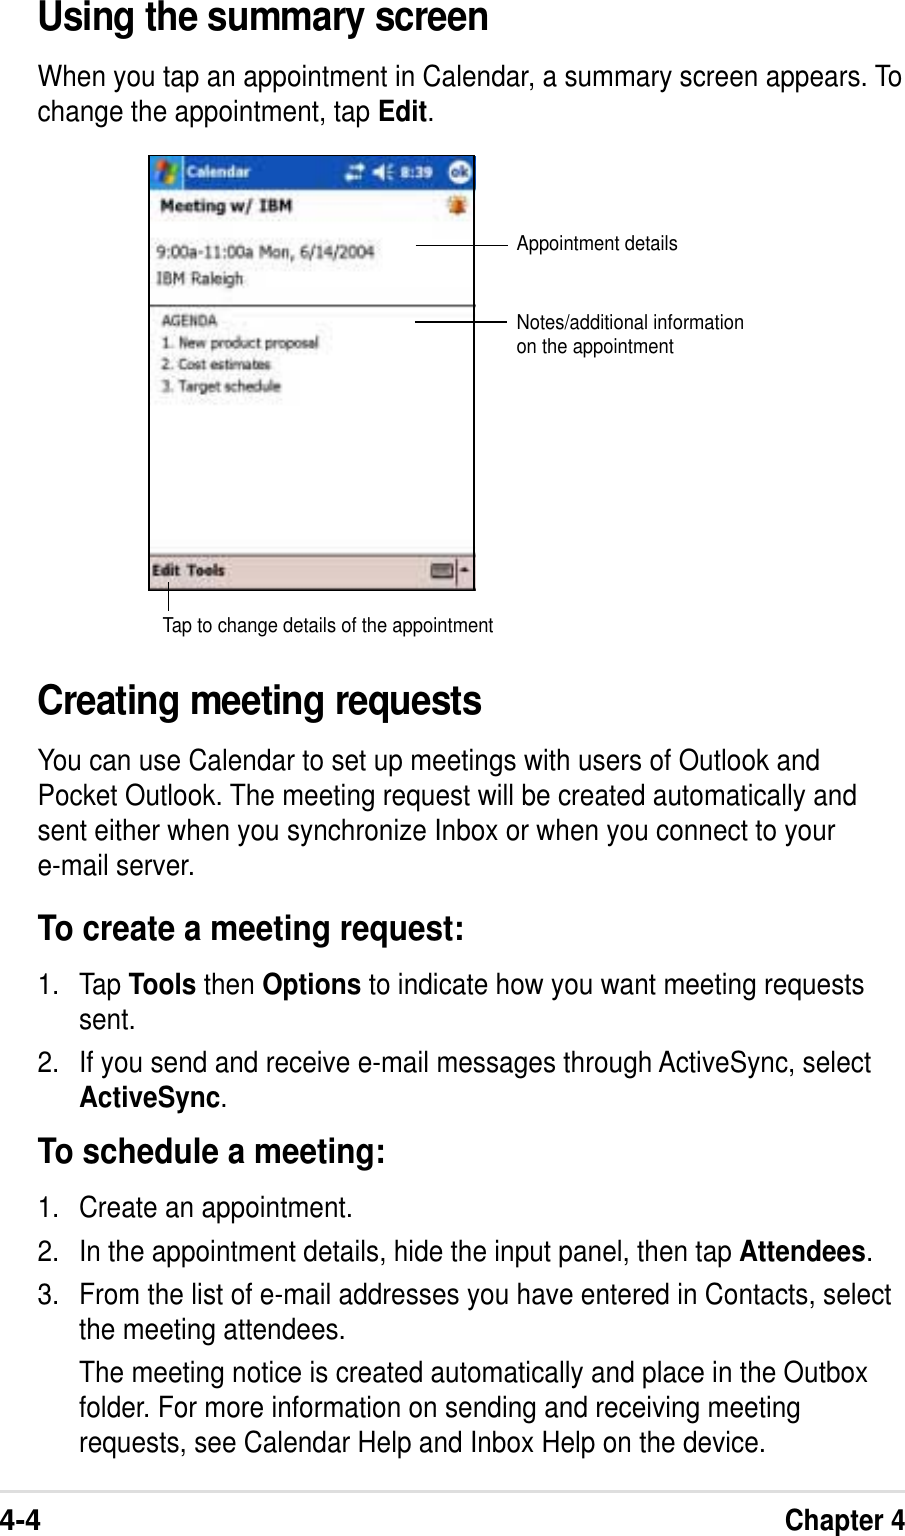 4-4Chapter 4Using the summary screenWhen you tap an appointment in Calendar, a summary screen appears. Tochange the appointment, tap Edit.Creating meeting requestsYou can use Calendar to set up meetings with users of Outlook andPocket Outlook. The meeting request will be created automatically andsent either when you synchronize Inbox or when you connect to youre-mail server.To create a meeting request:1. Tap Tools then Options to indicate how you want meeting requestssent.2. If you send and receive e-mail messages through ActiveSync, selectActiveSync.To schedule a meeting:1. Create an appointment.2. In the appointment details, hide the input panel, then tap Attendees.3. From the list of e-mail addresses you have entered in Contacts, selectthe meeting attendees.The meeting notice is created automatically and place in the Outboxfolder. For more information on sending and receiving meetingrequests, see Calendar Help and Inbox Help on the device.Appointment detailsNotes/additional informationon the appointmentTap to change details of the appointment